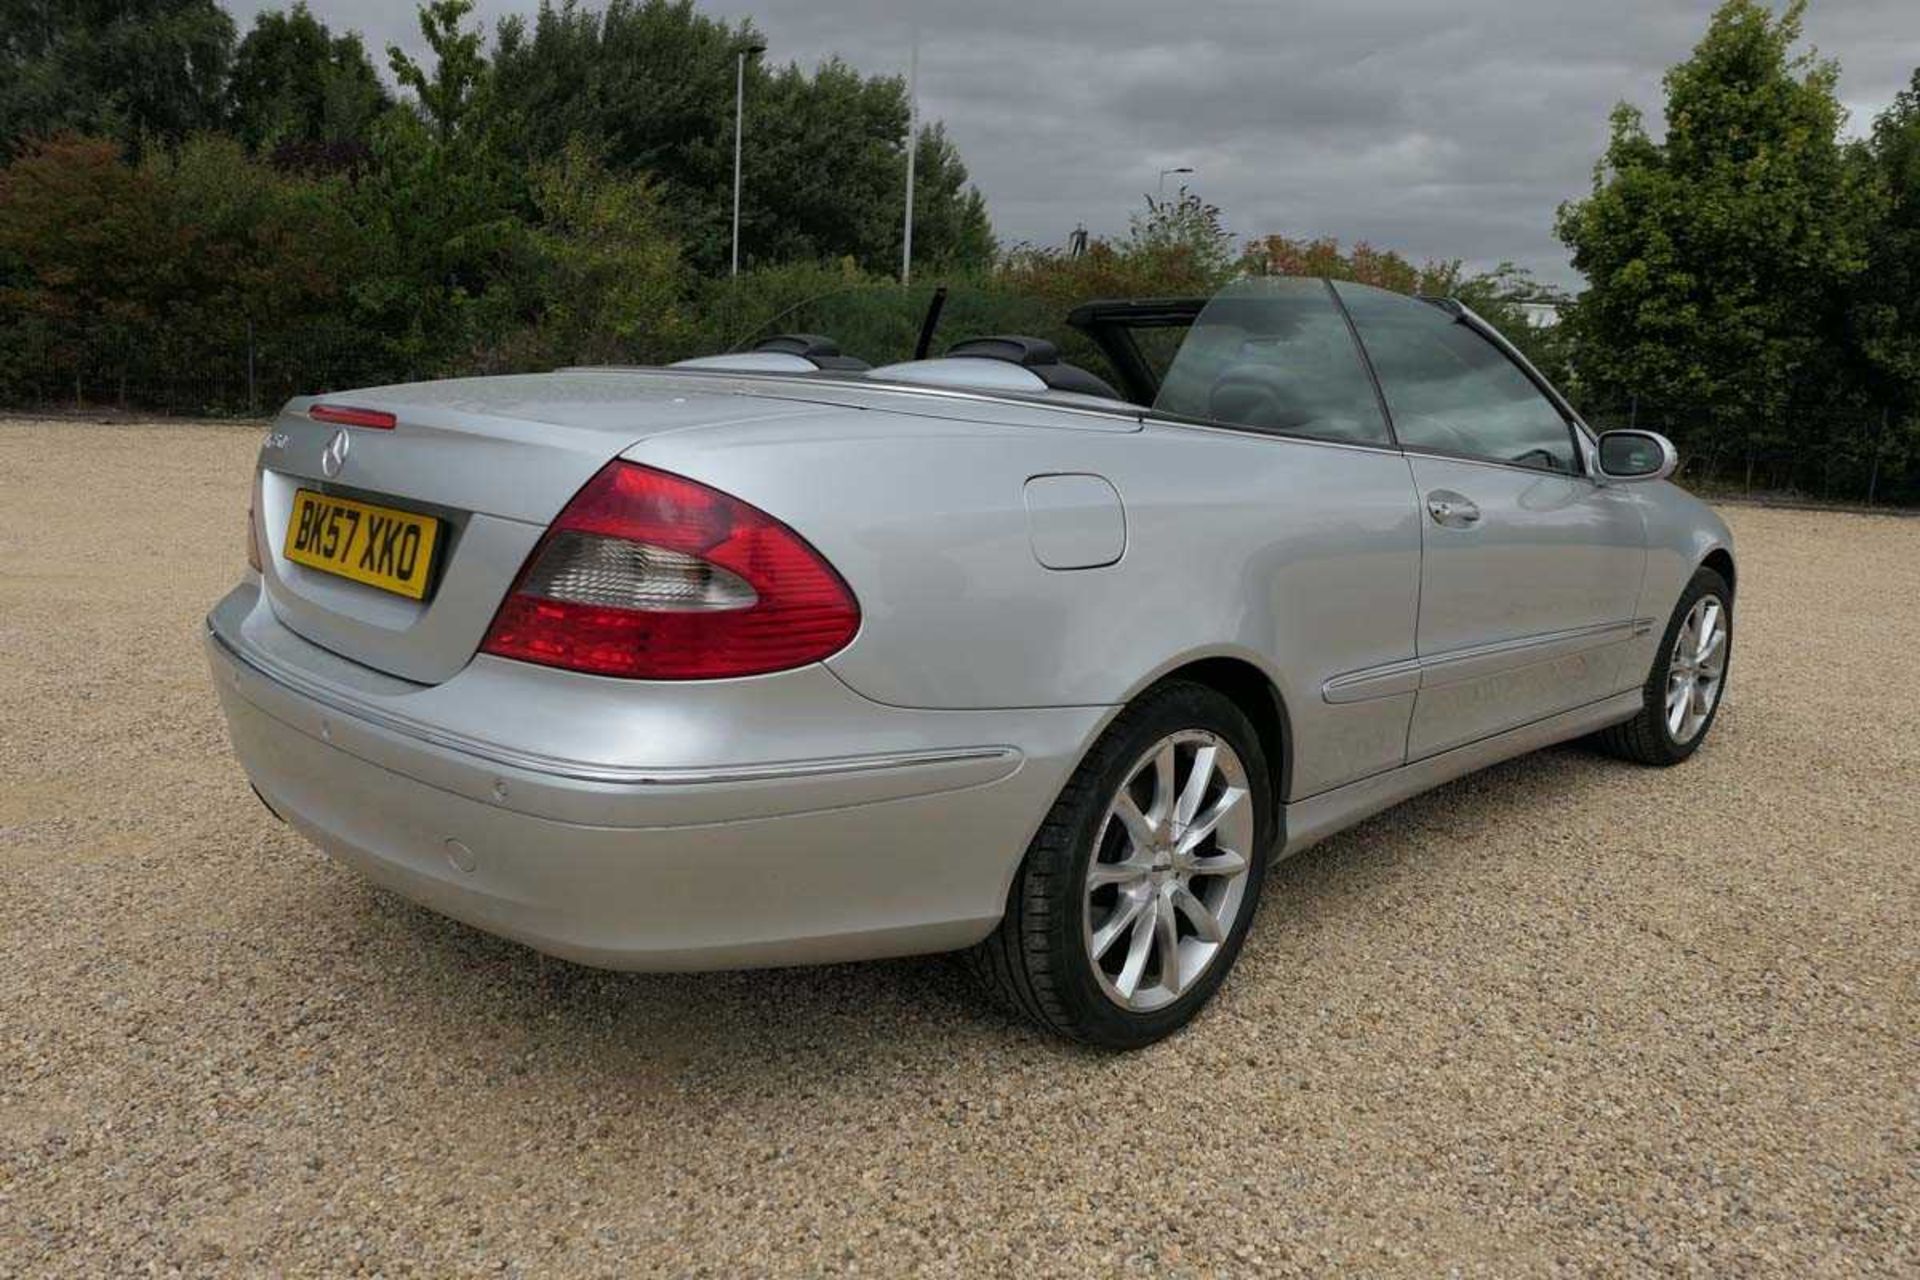 BK57 XKO (2007) Mercedes 350 CLK two door convertible in silver, 3.5L petrol automatic, mileage - Image 4 of 14